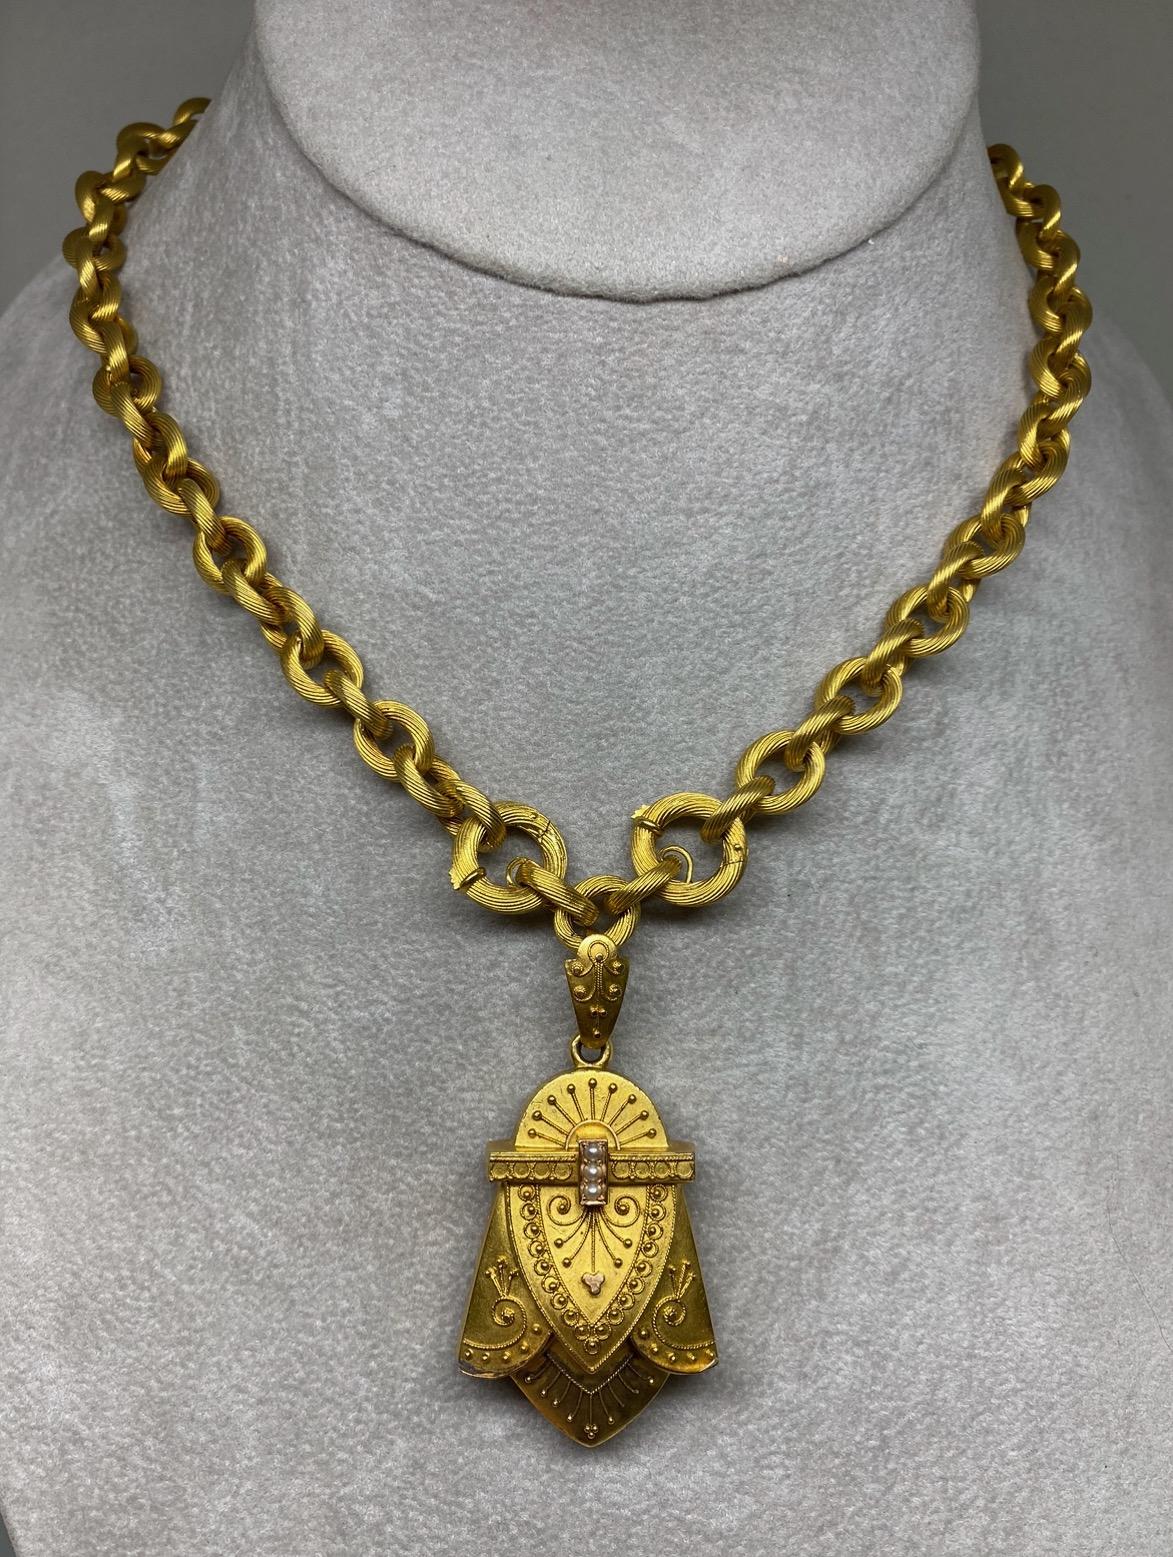 14k Yellow Gold Etruscan Revival Victorian Locket Pendant Chain Necklace For Sale 3